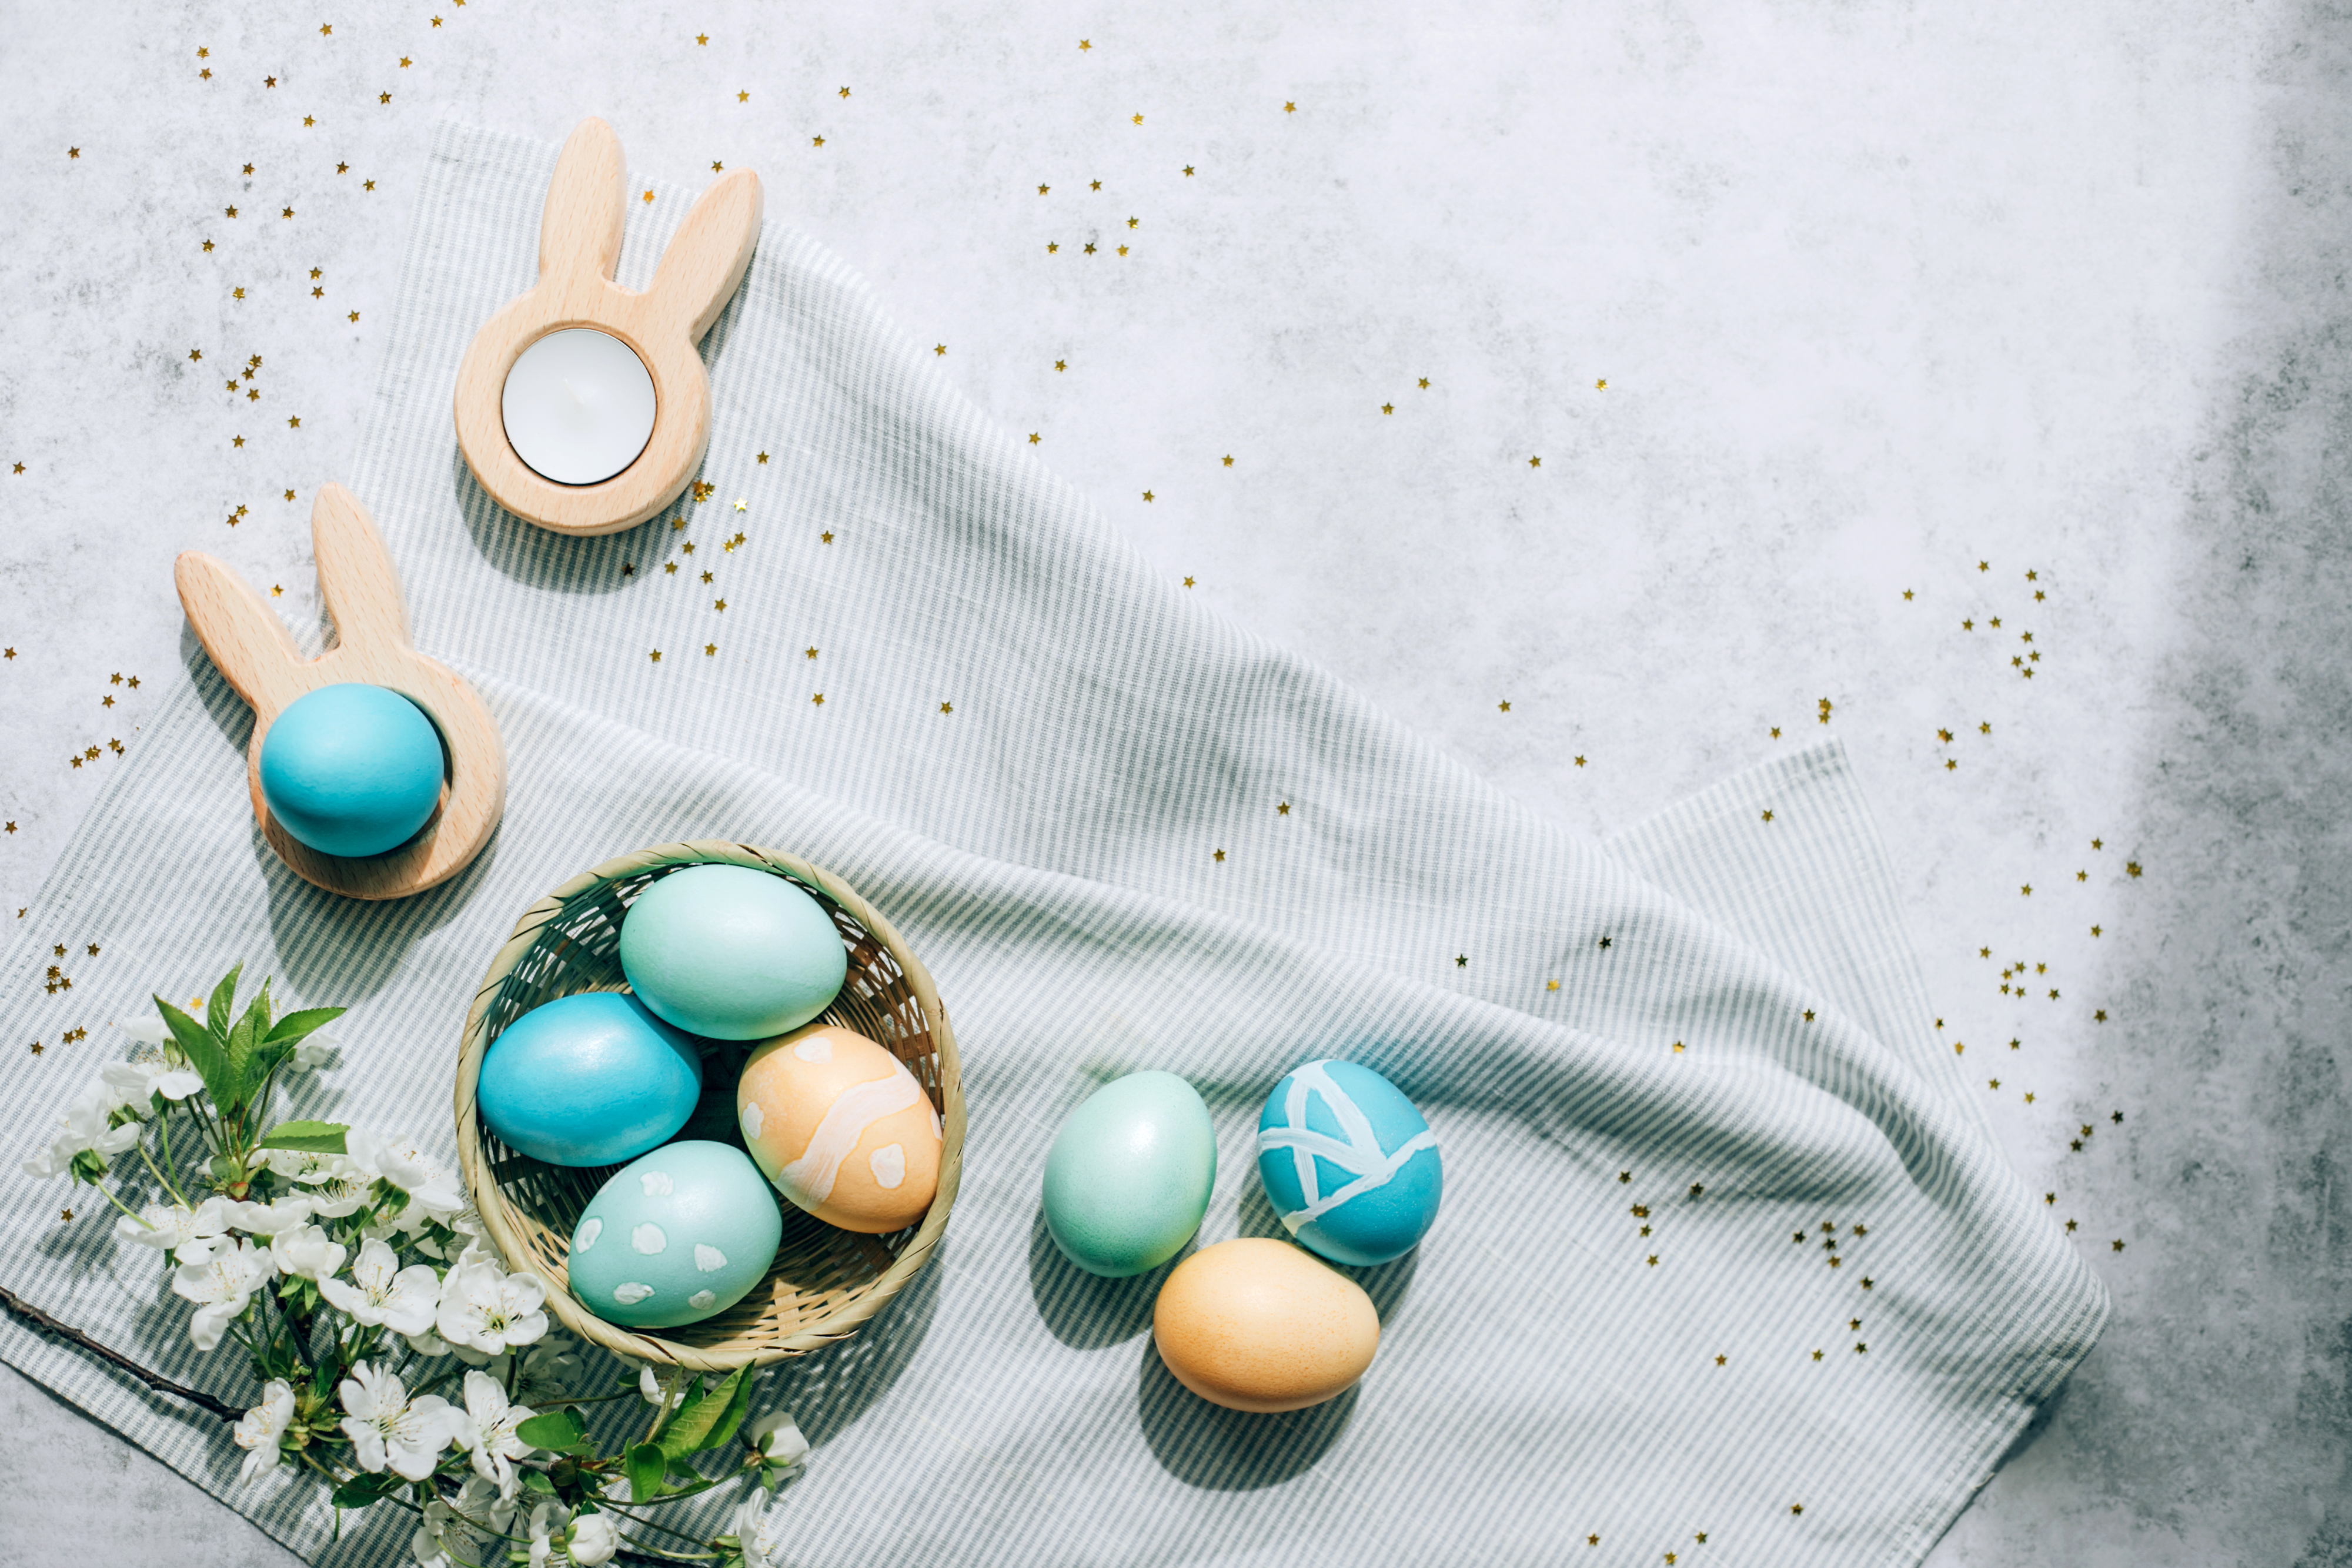 Easter composition with painted eggs, bunny decorations, and flowers on a textured background